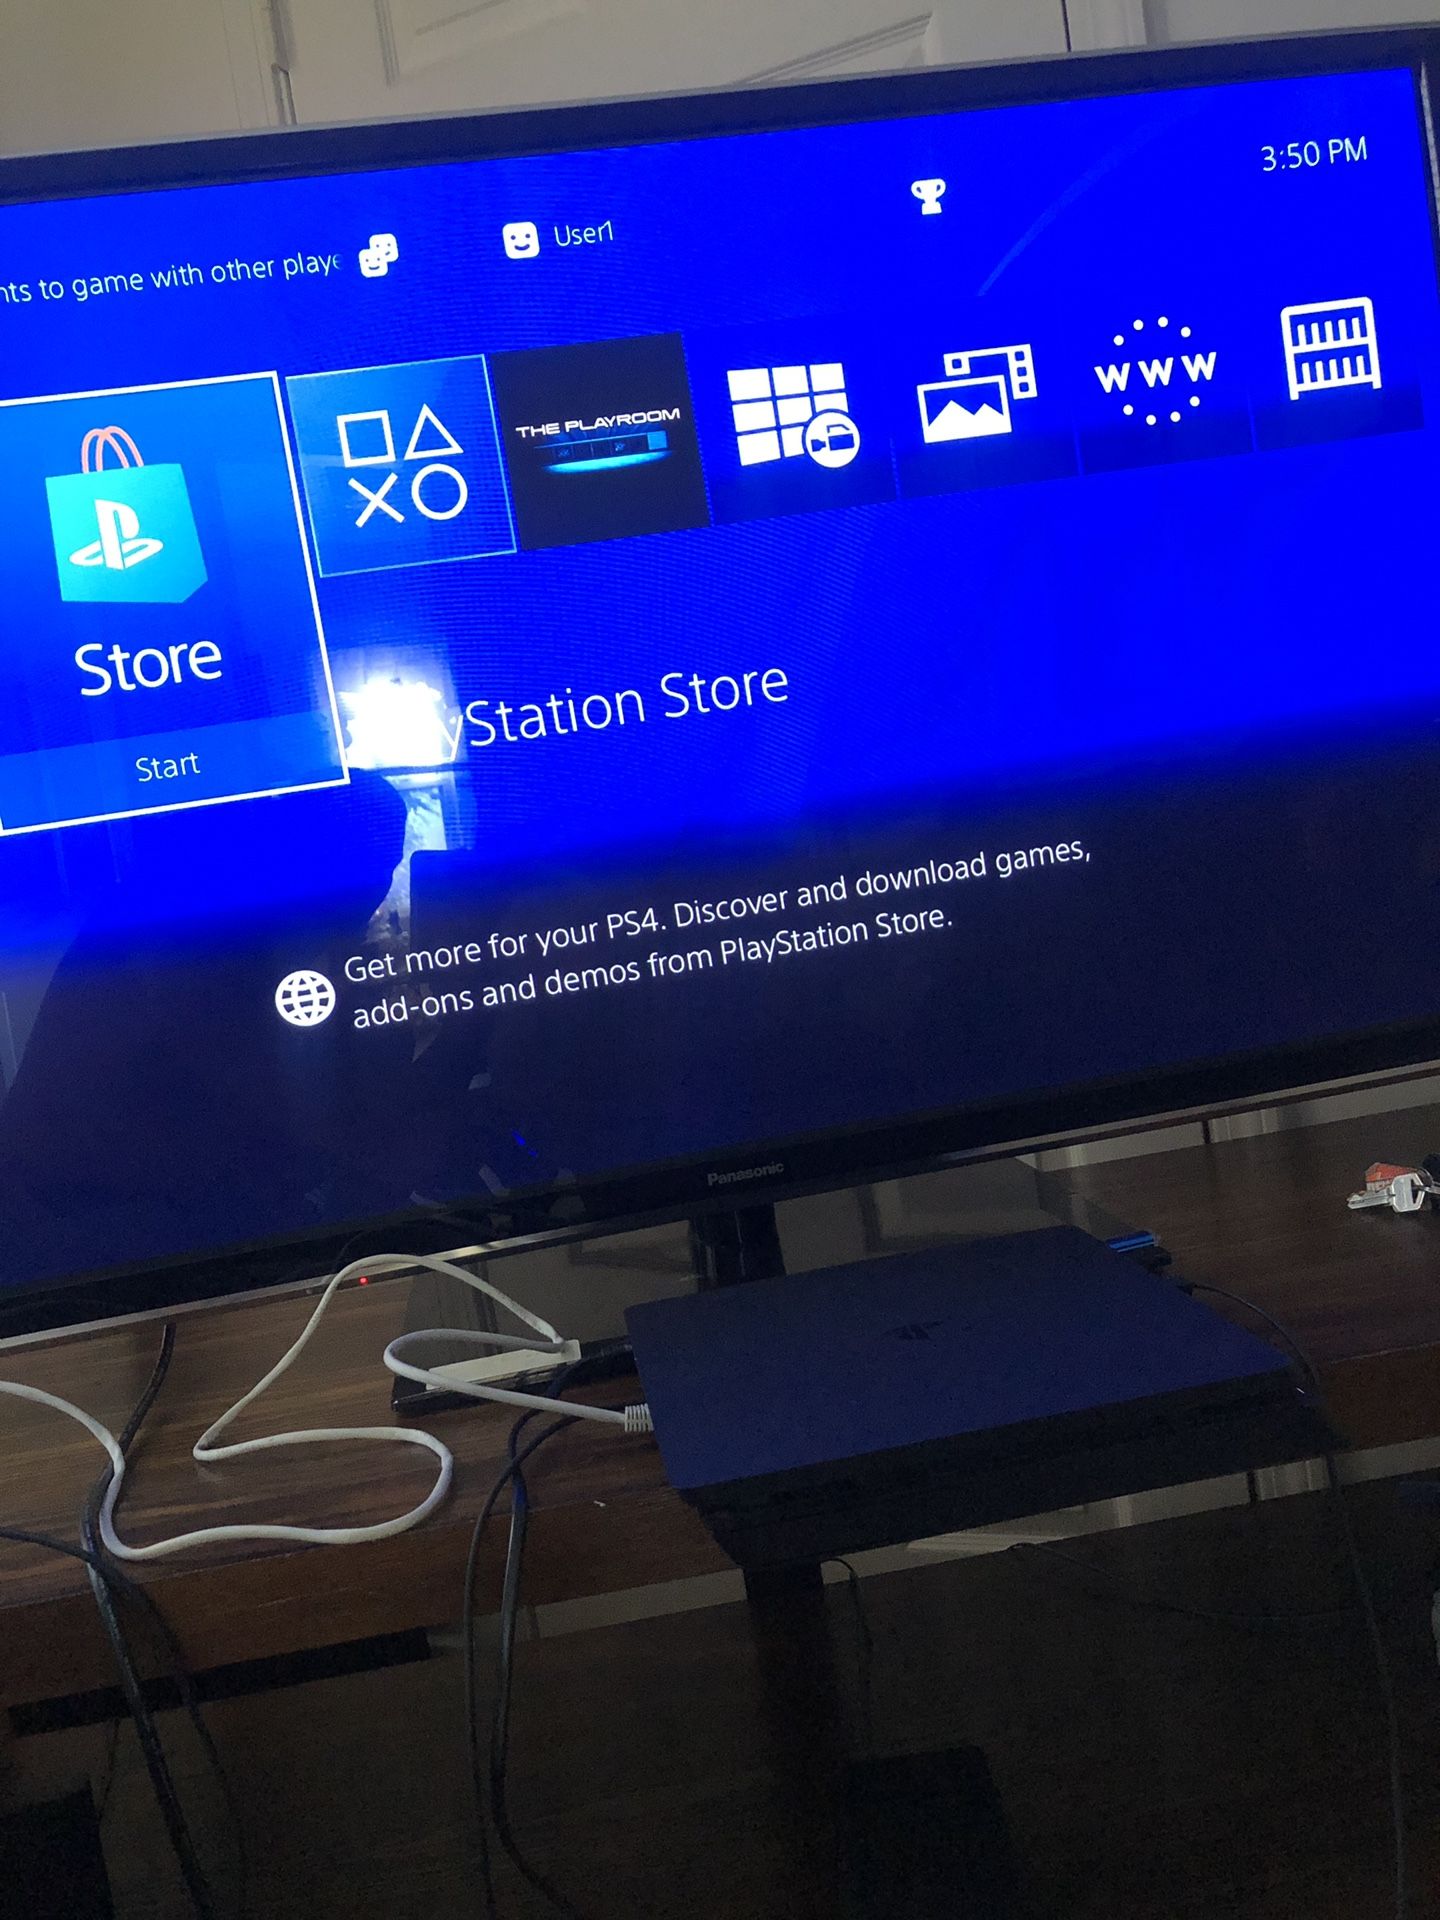 Ps4 Slim 500Gb looking to trade for a Nintendo switch